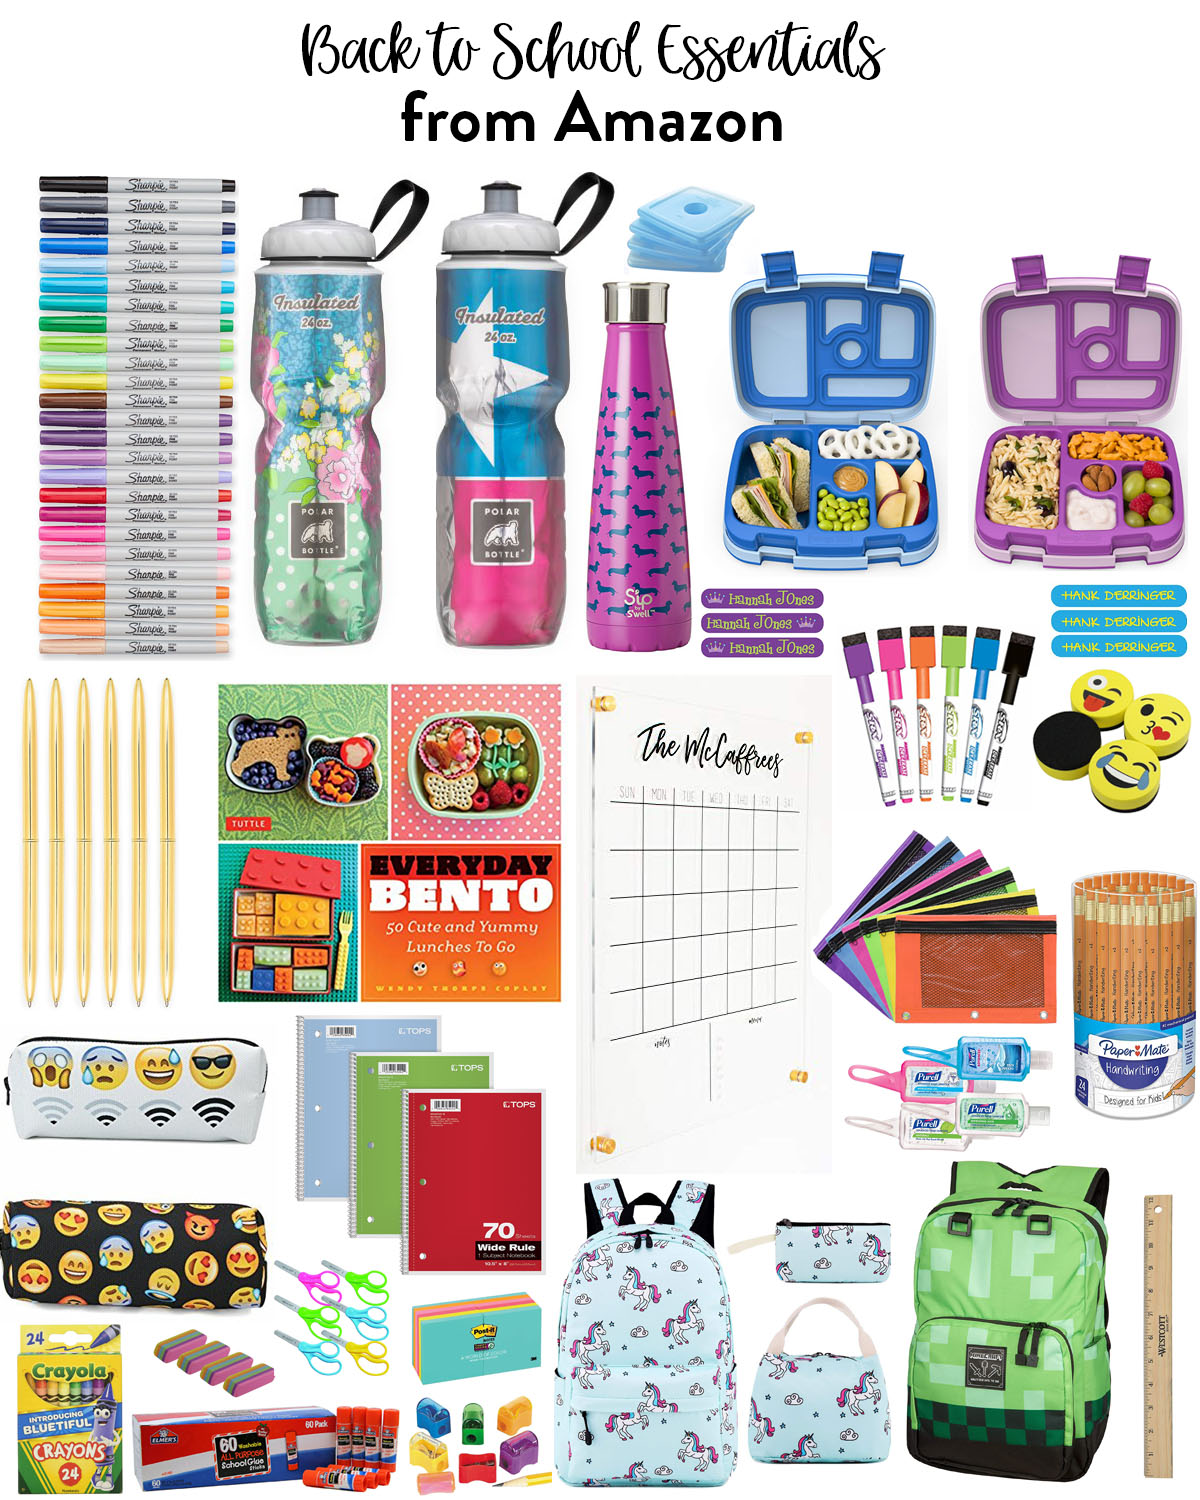 My Favorite Back to School Essentials with Amazon House of Fancy